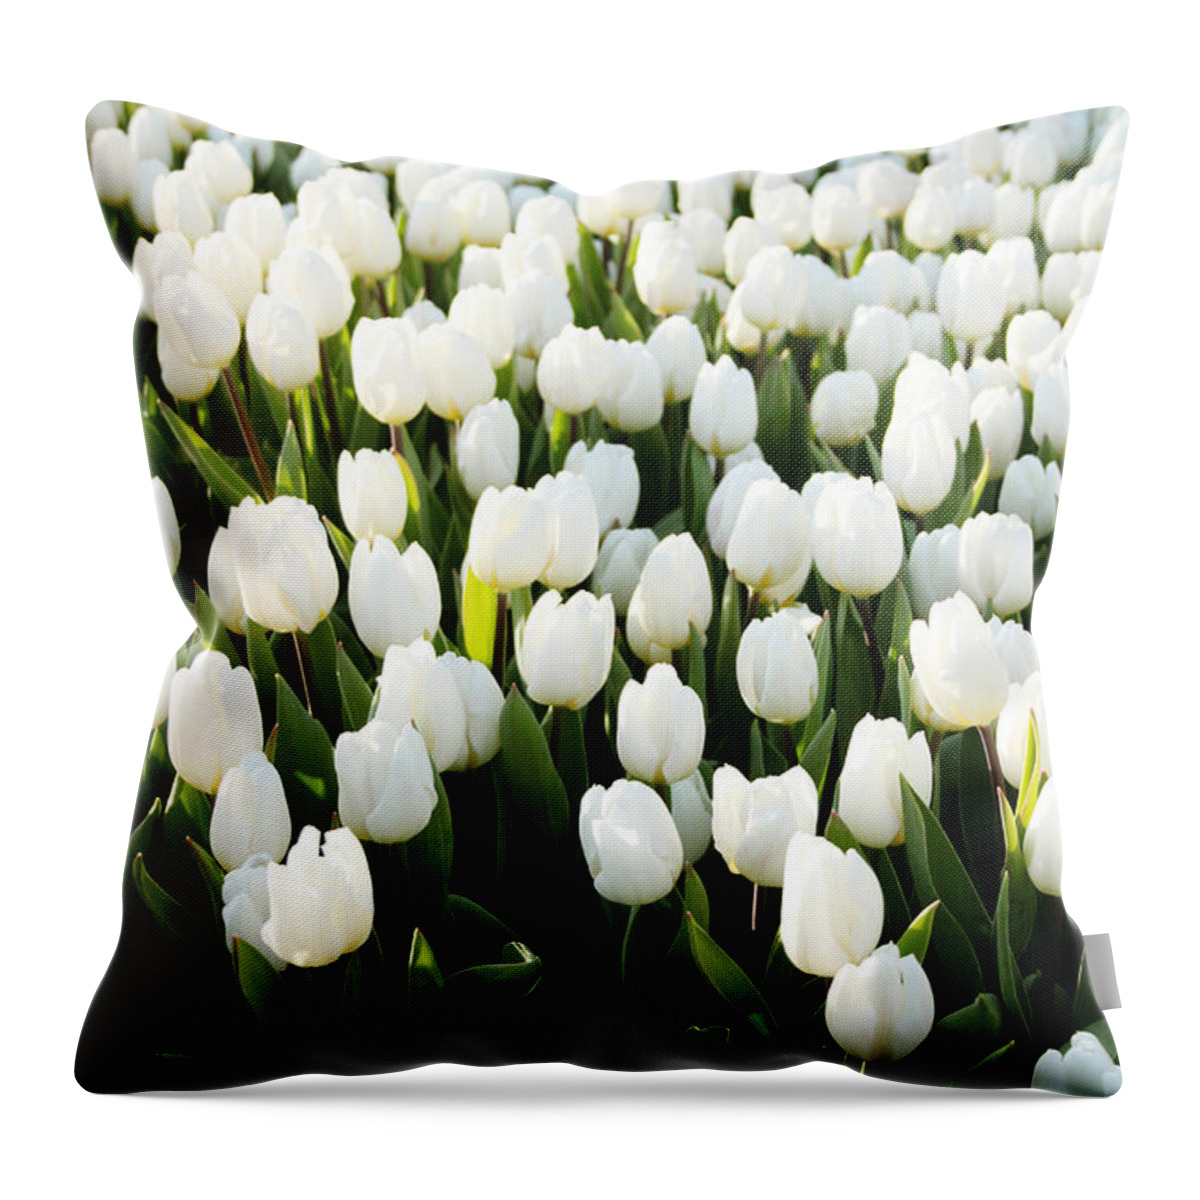 Tulips Throw Pillow featuring the photograph White Tulips In the Garden by Linda Woods